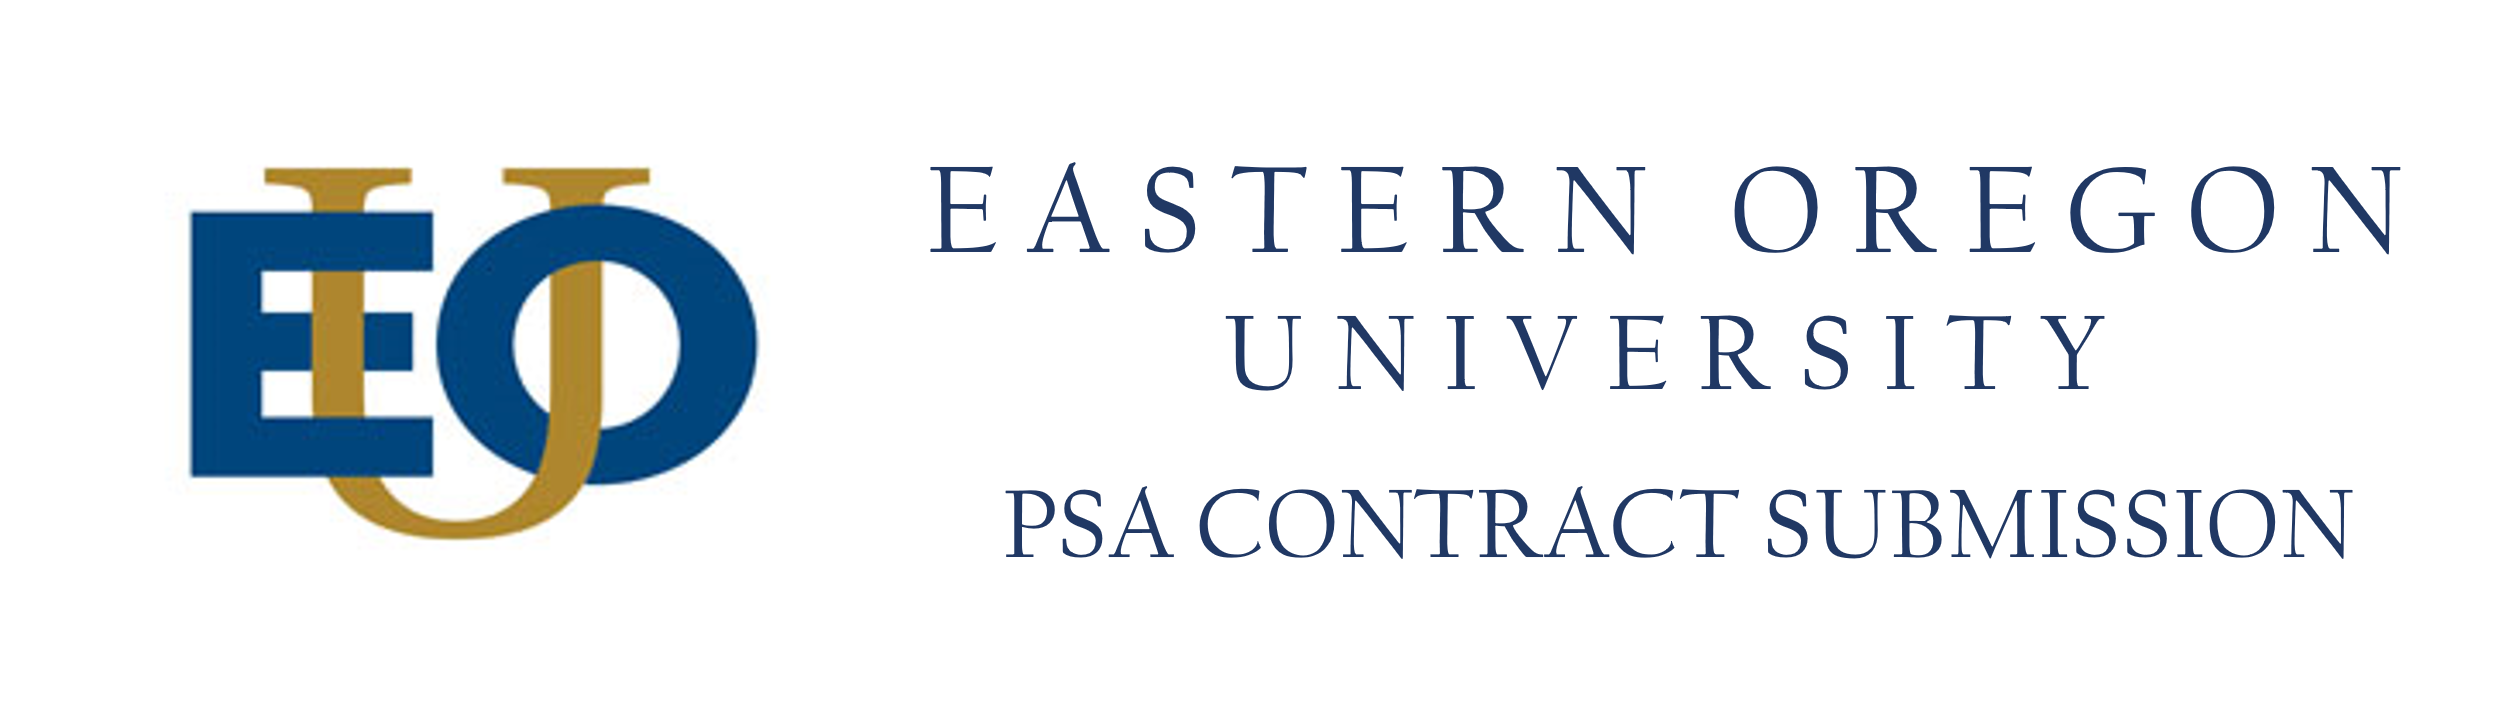 PSA Contract Submission